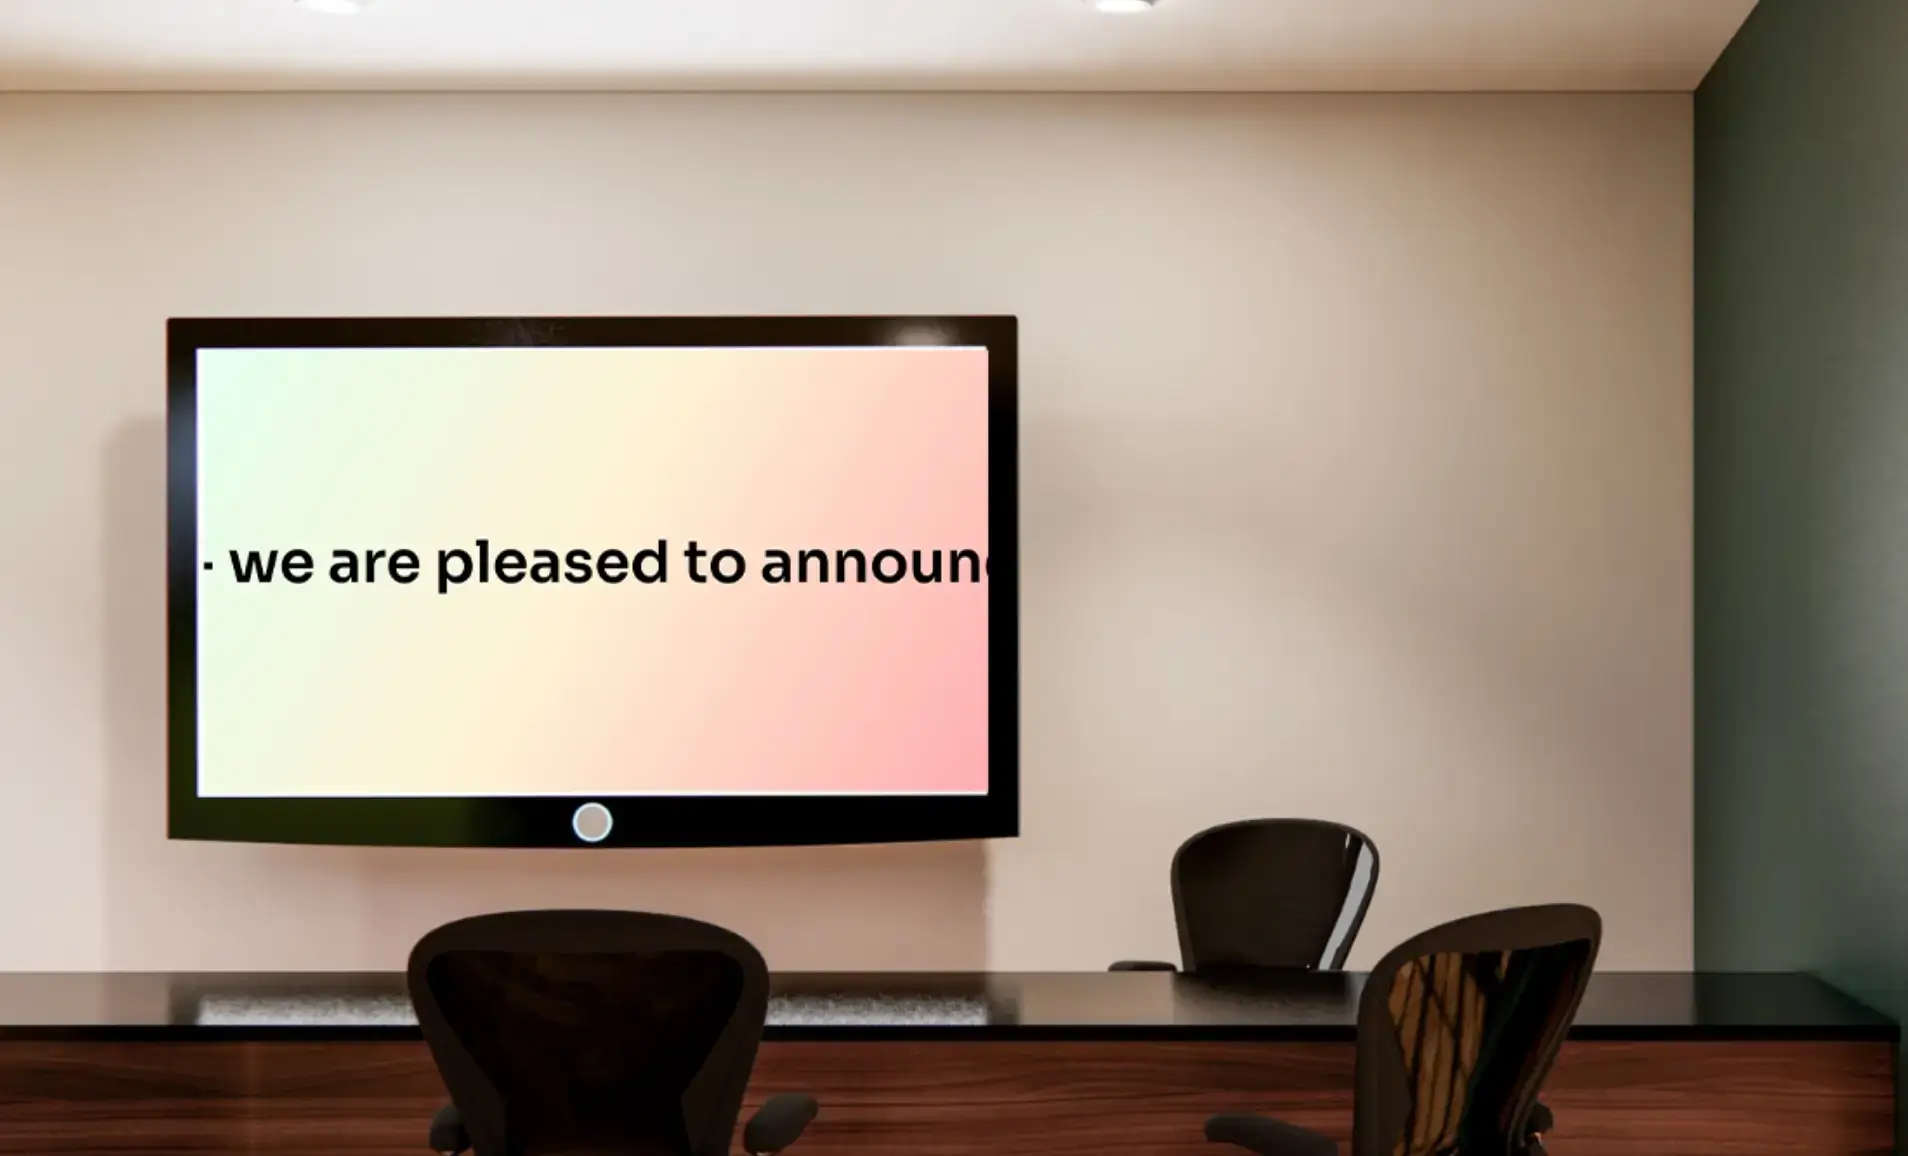 digital signage screen in a meeting room dispaying scrolling text about an important company announcement.